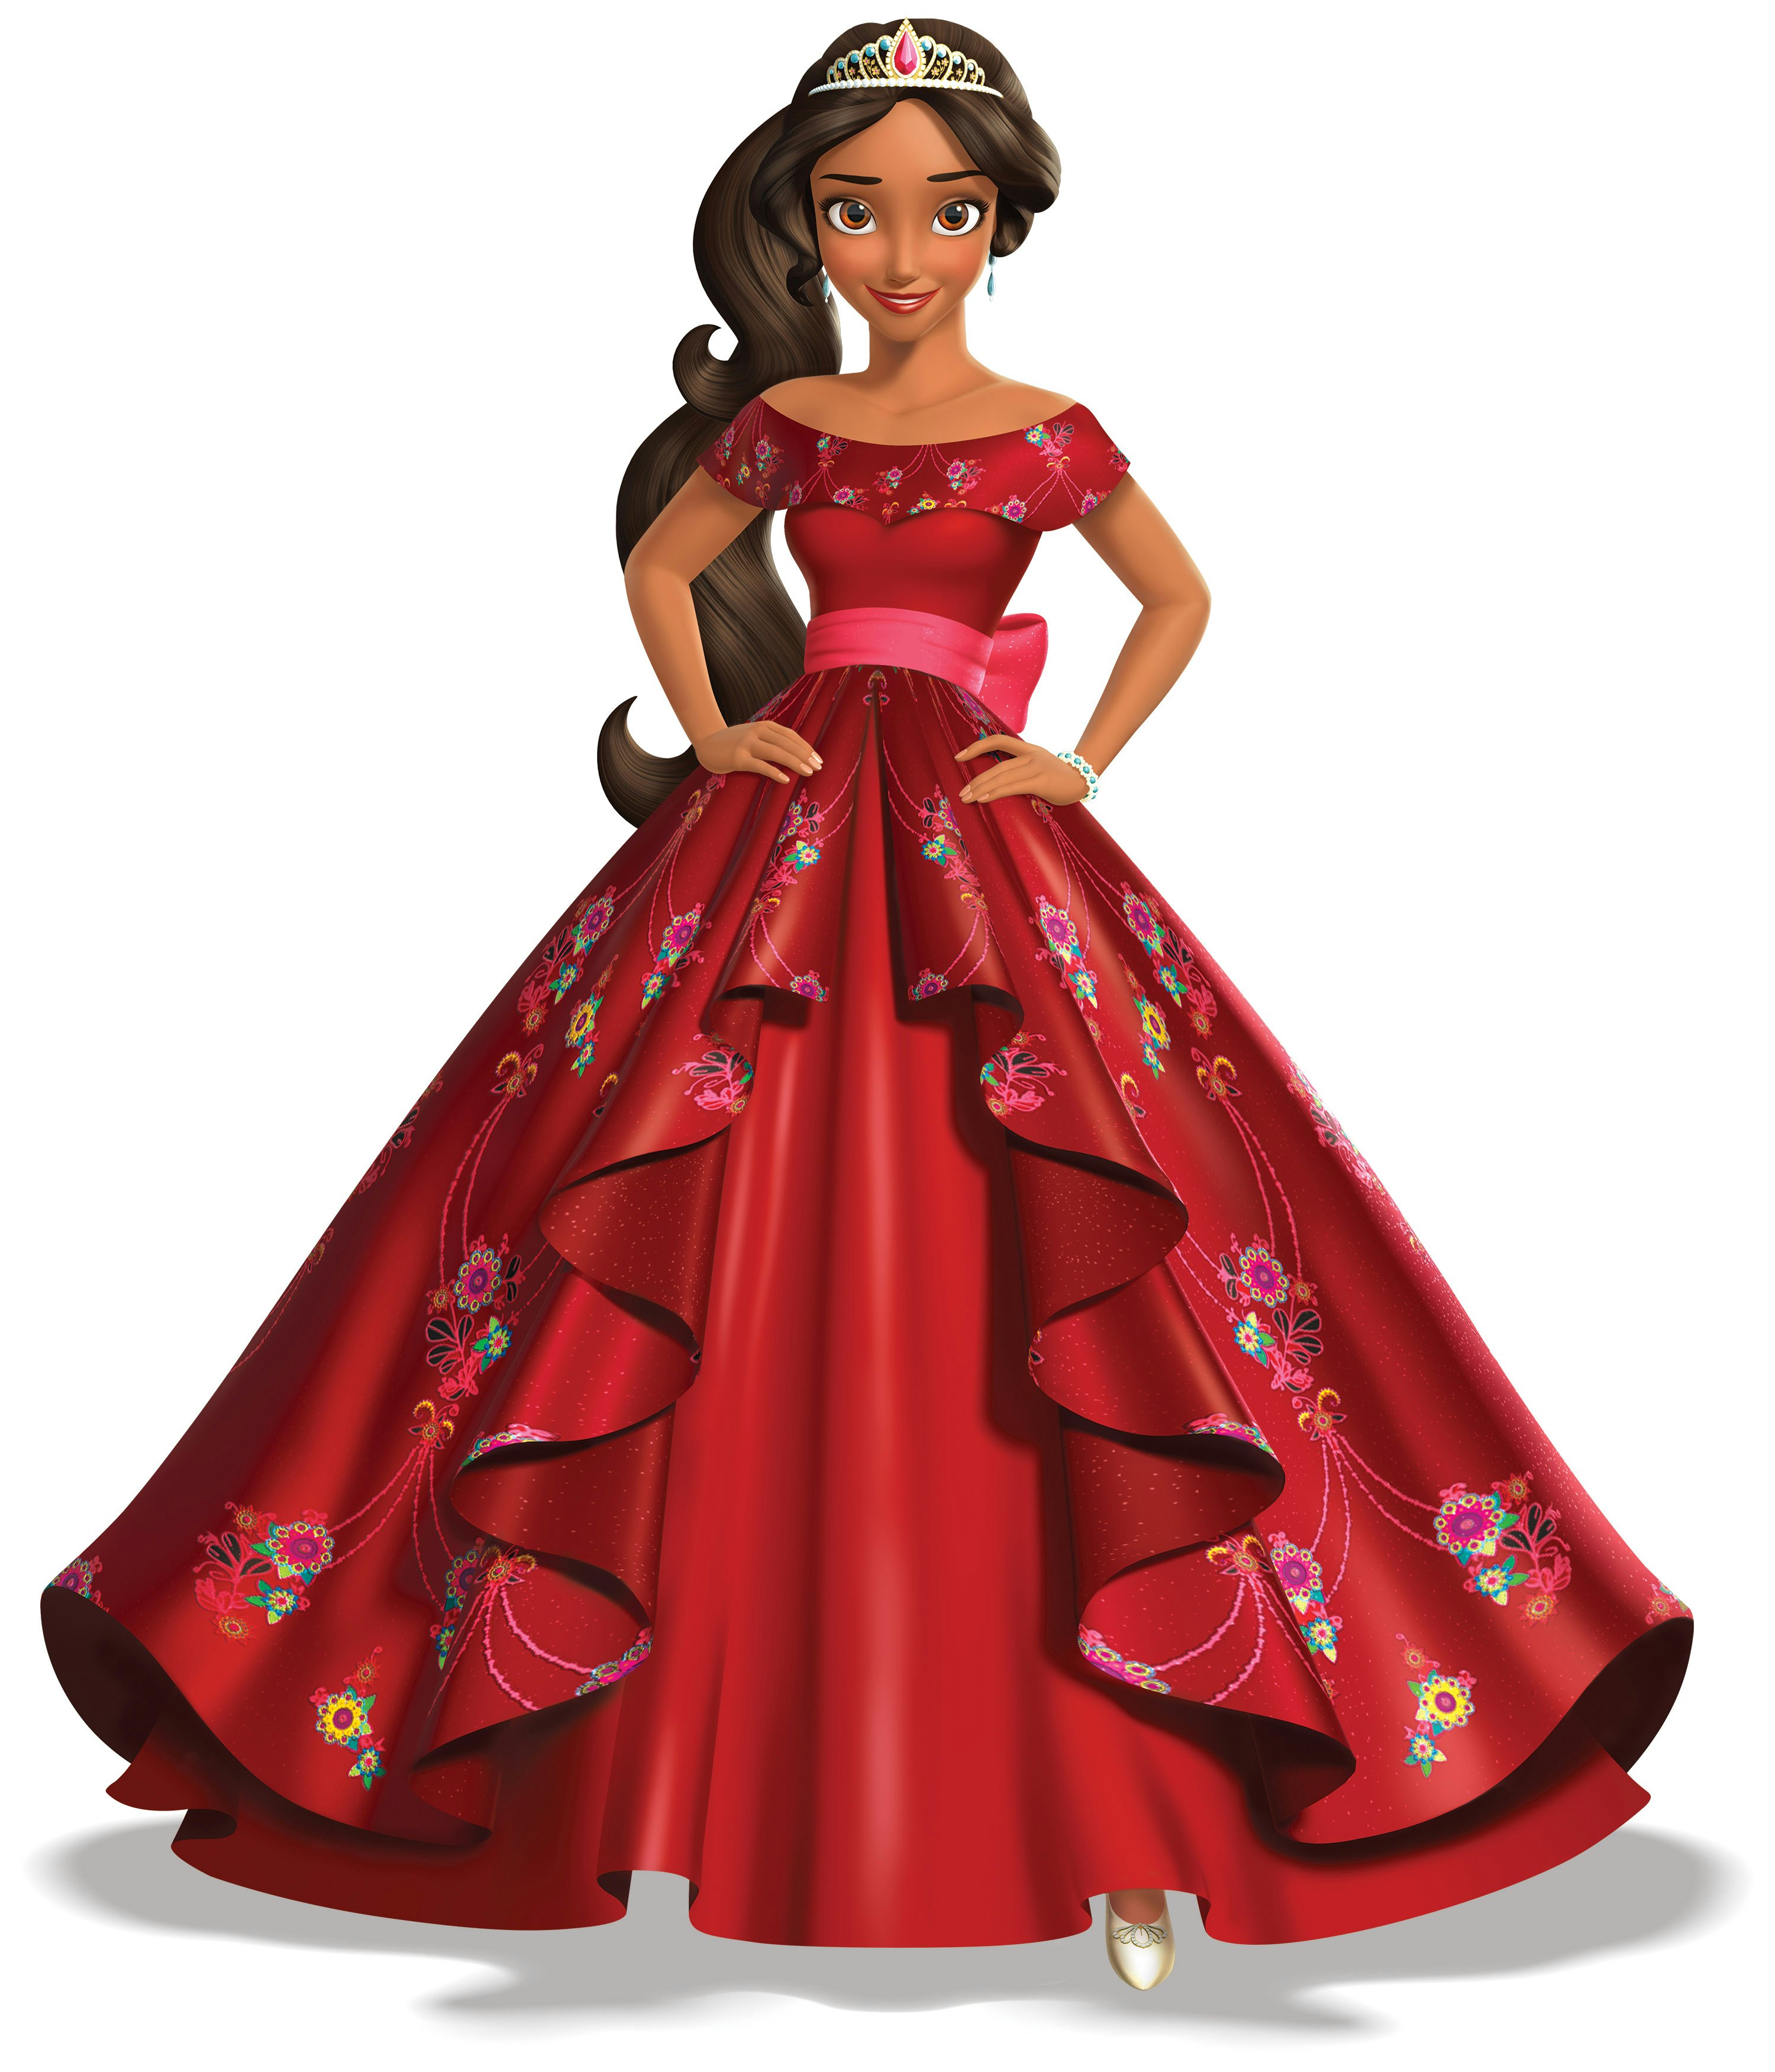 princess with red dress